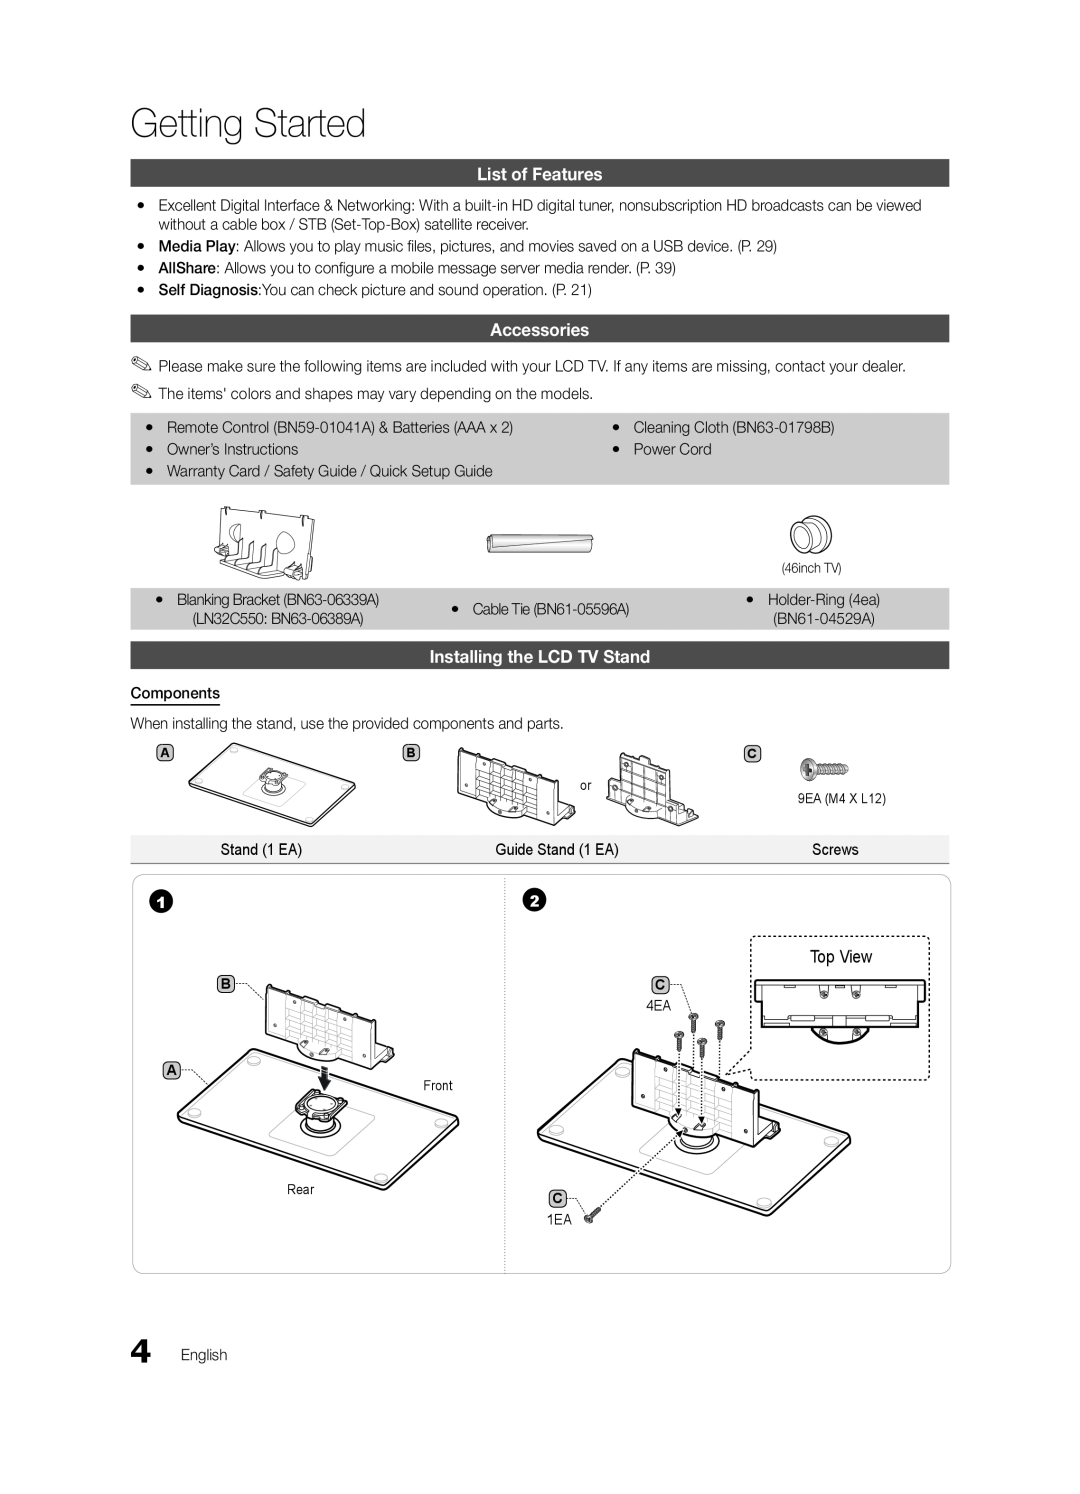 Samsung LN32C550 user manual Getting Started, List of Features, Accessories, Installing the LCD TV Stand, Top View 